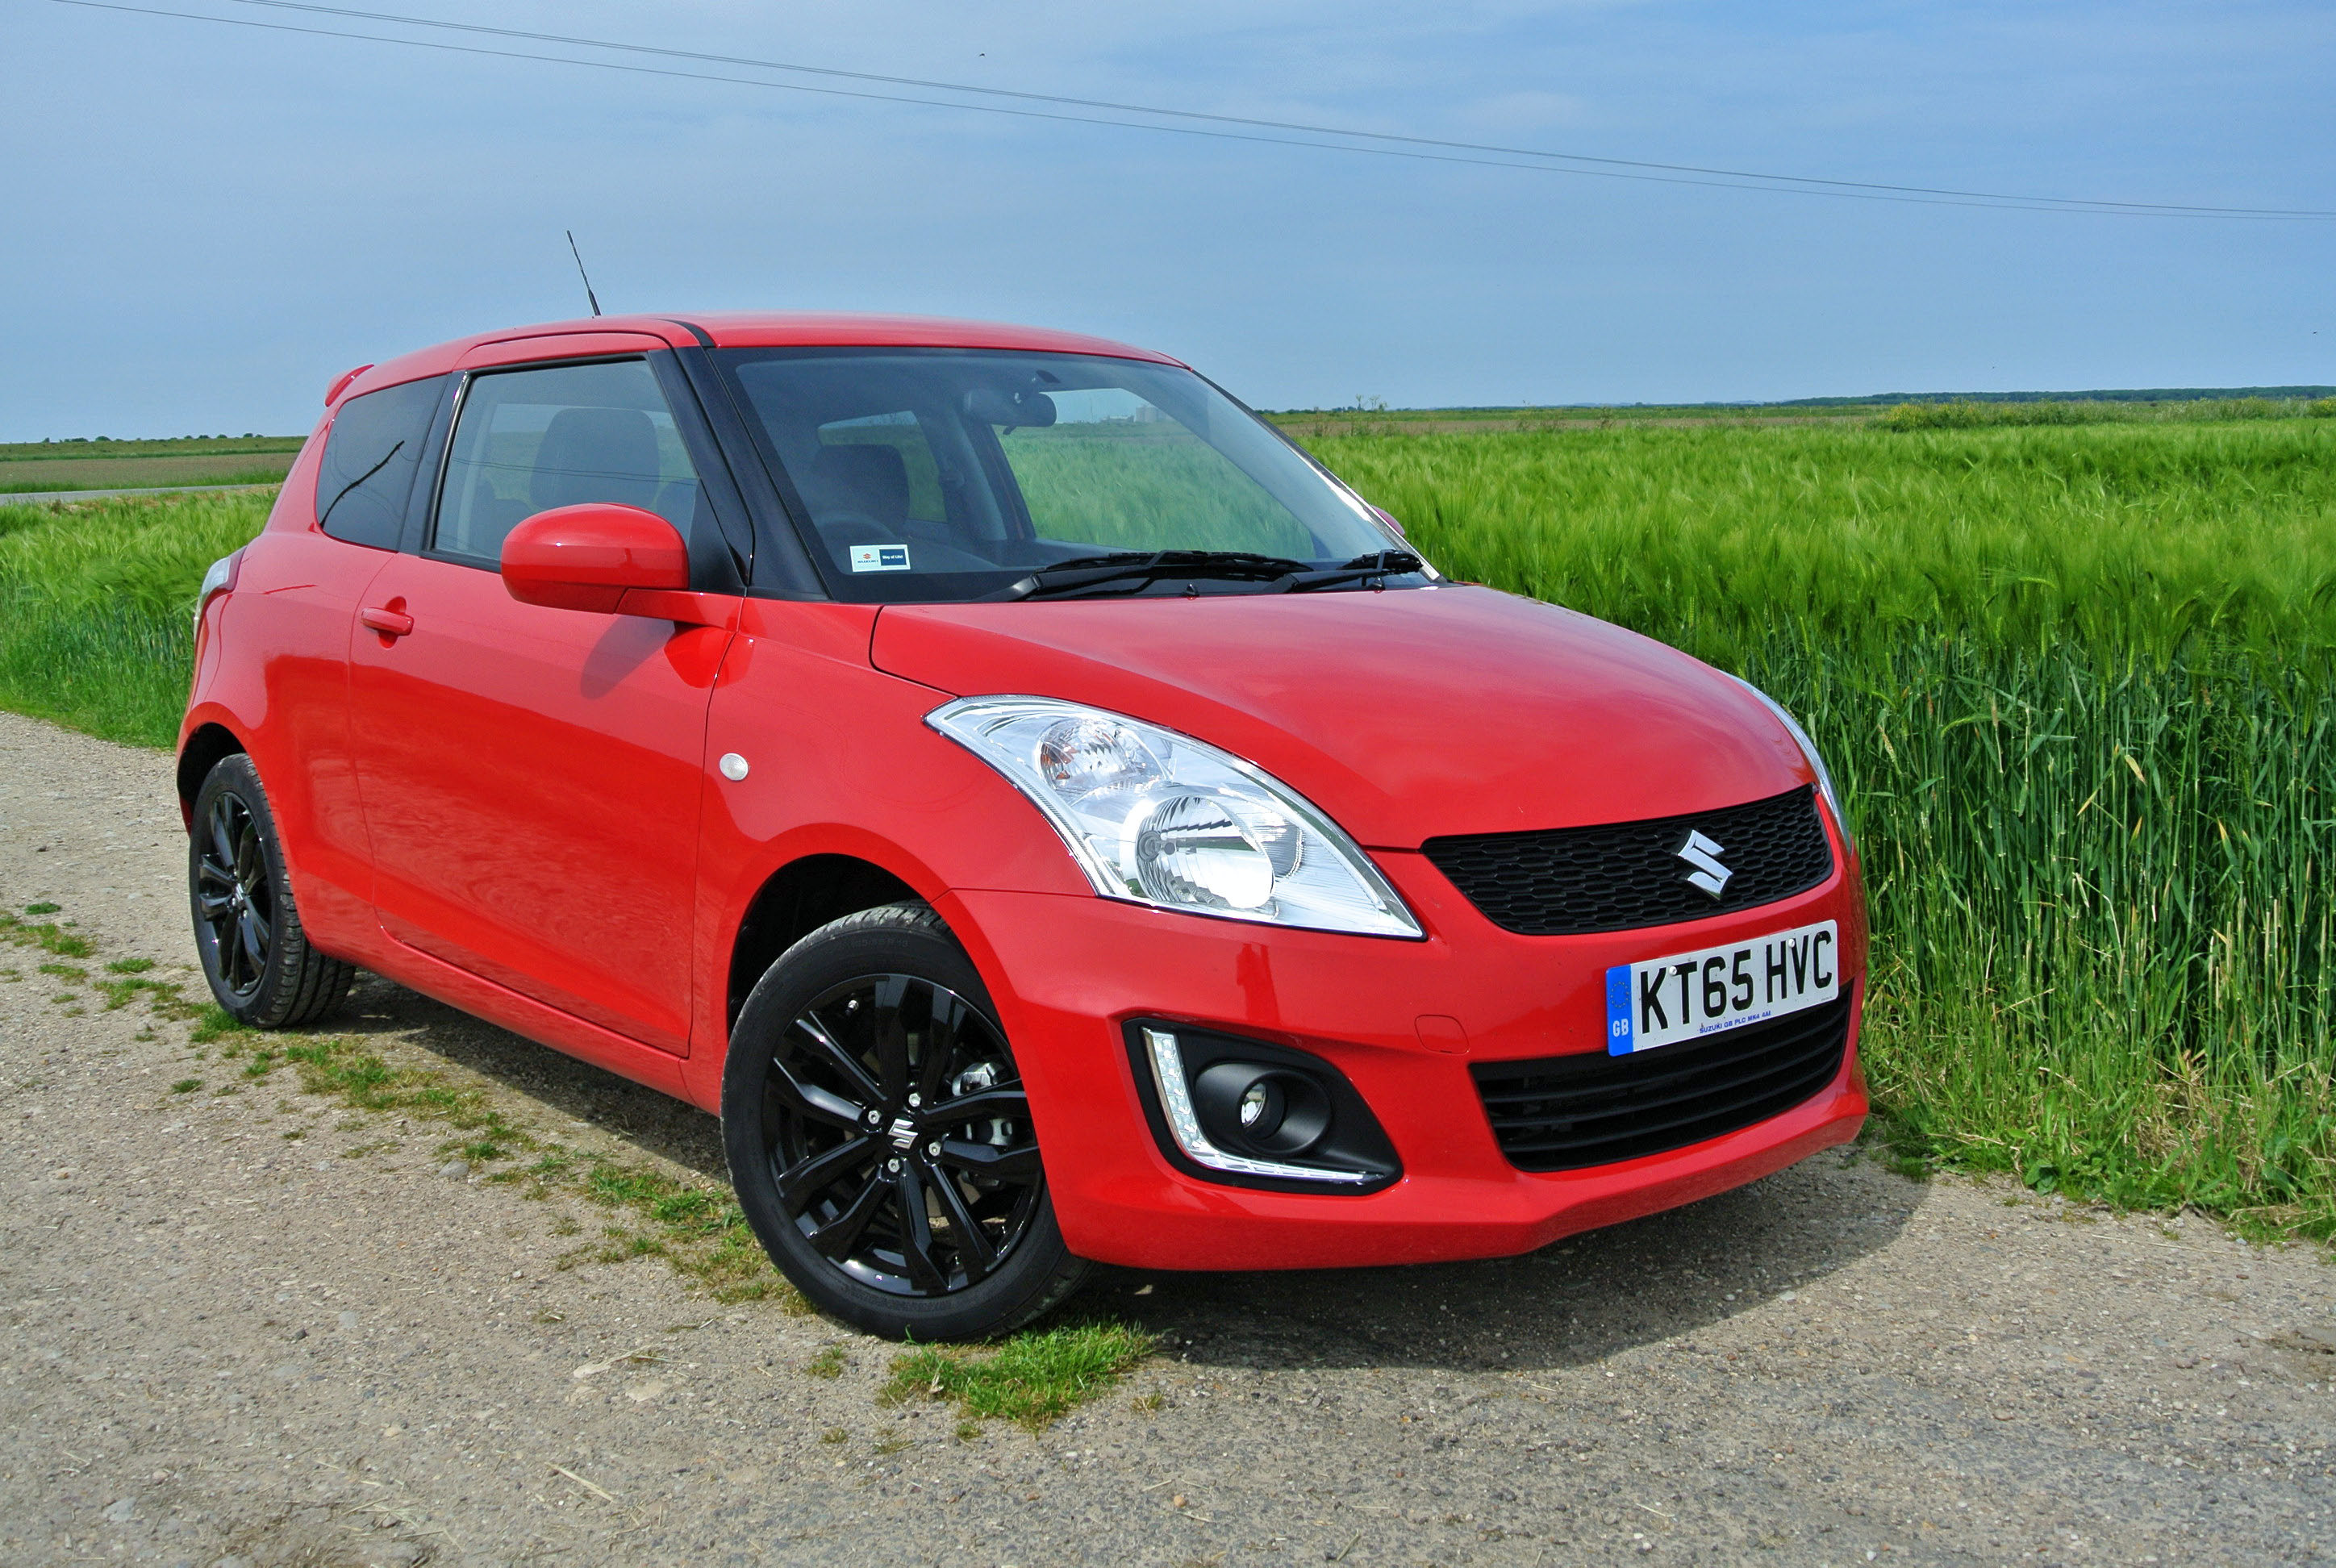 Suzuki Swift avoids the ‘Monster’ tag but over 5m buyers cannot be wrong